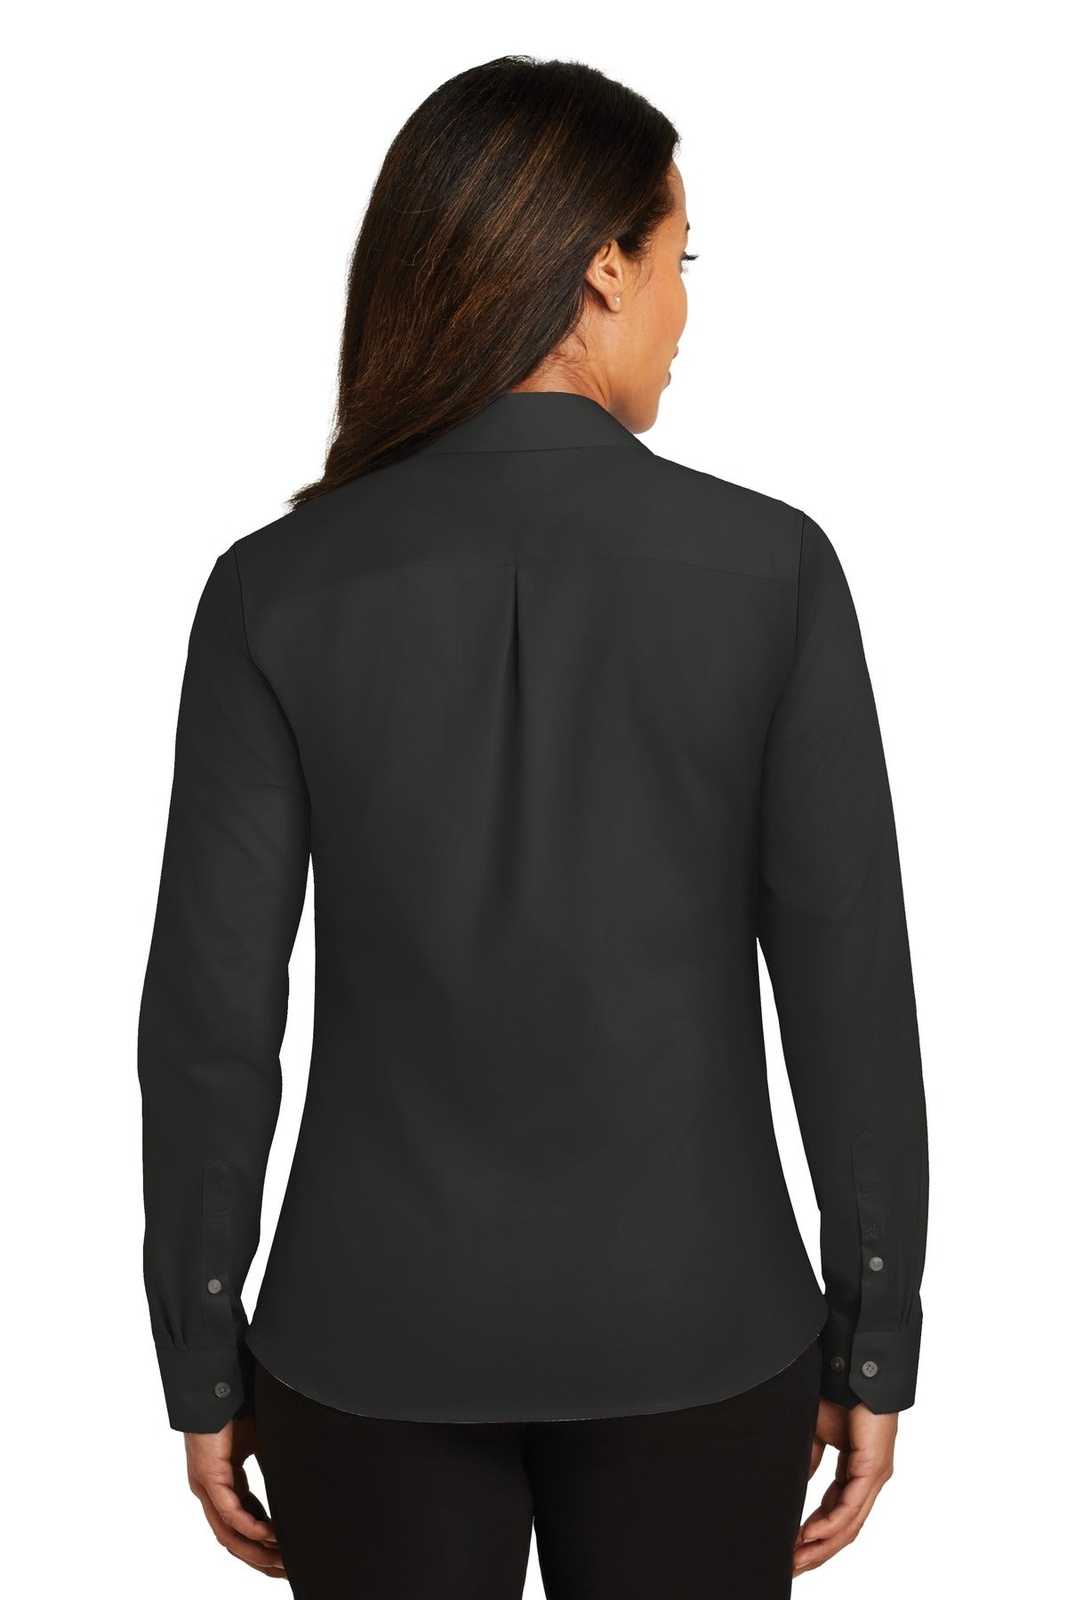 Red House RH79 Ladies Non-Iron Twill Shirt - Black - HIT a Double - 1